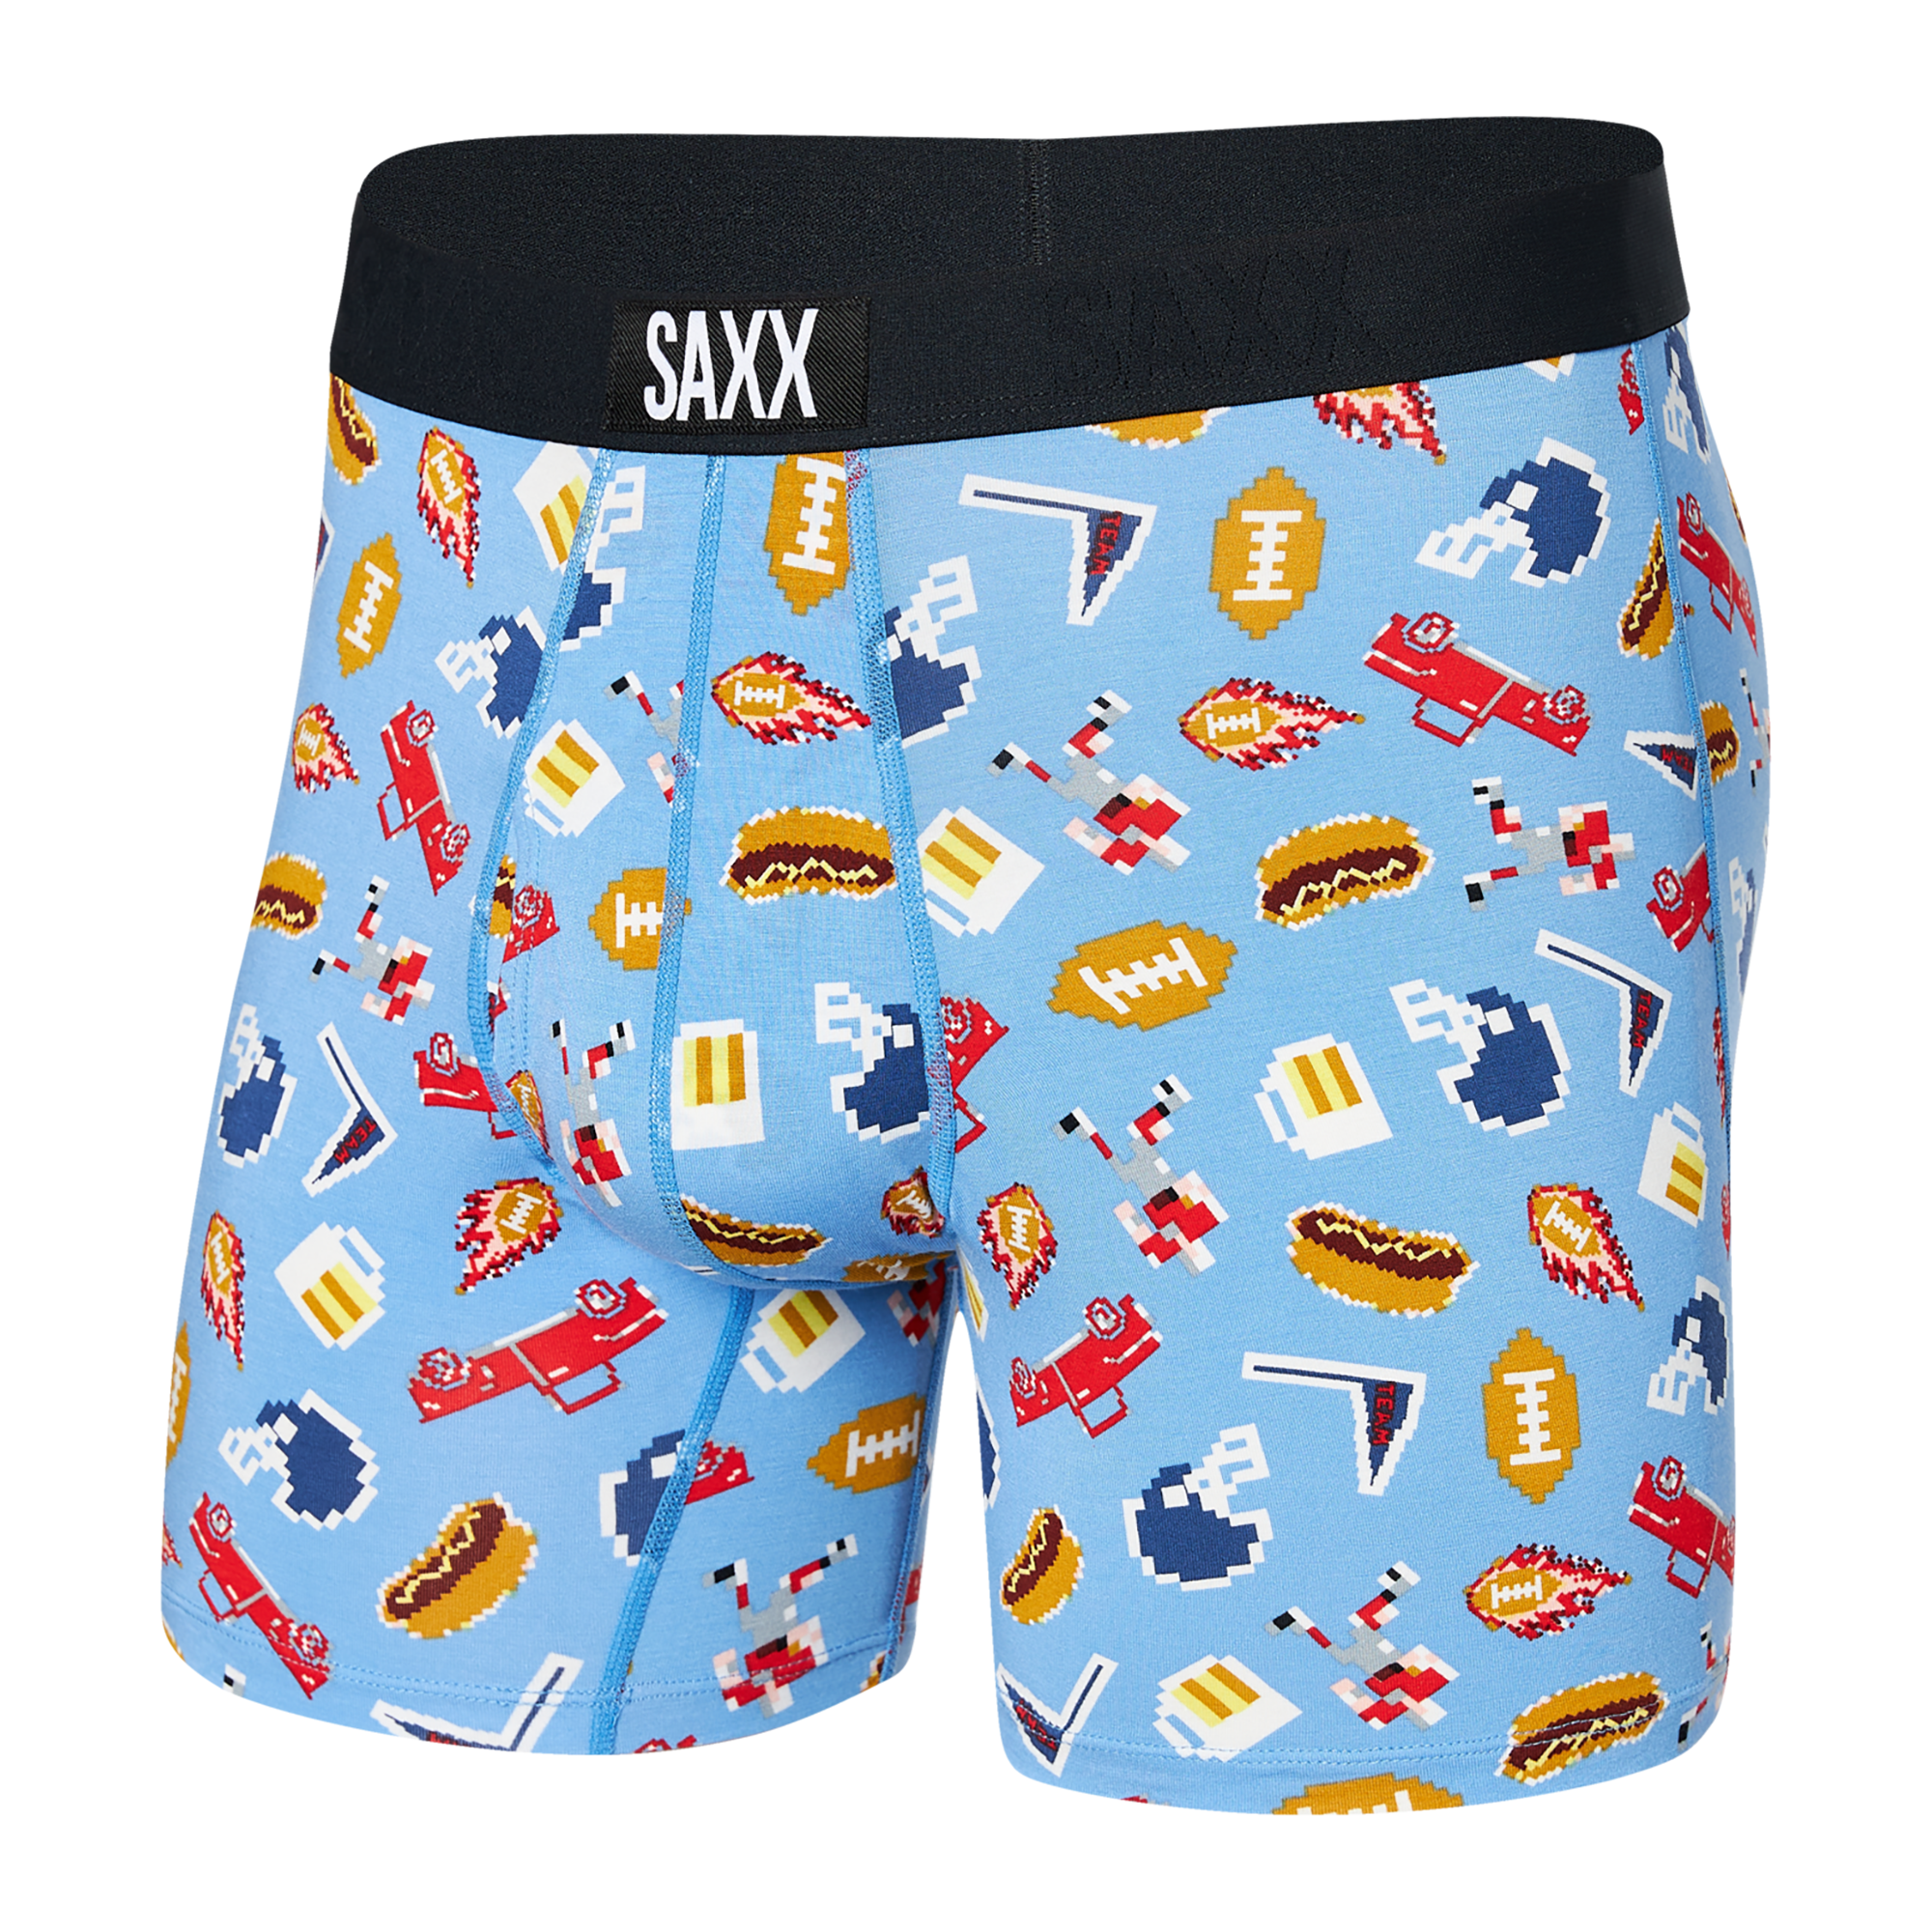 Front of Ultra Super Soft Boxer Brief Fly in Football Gamer- Blue